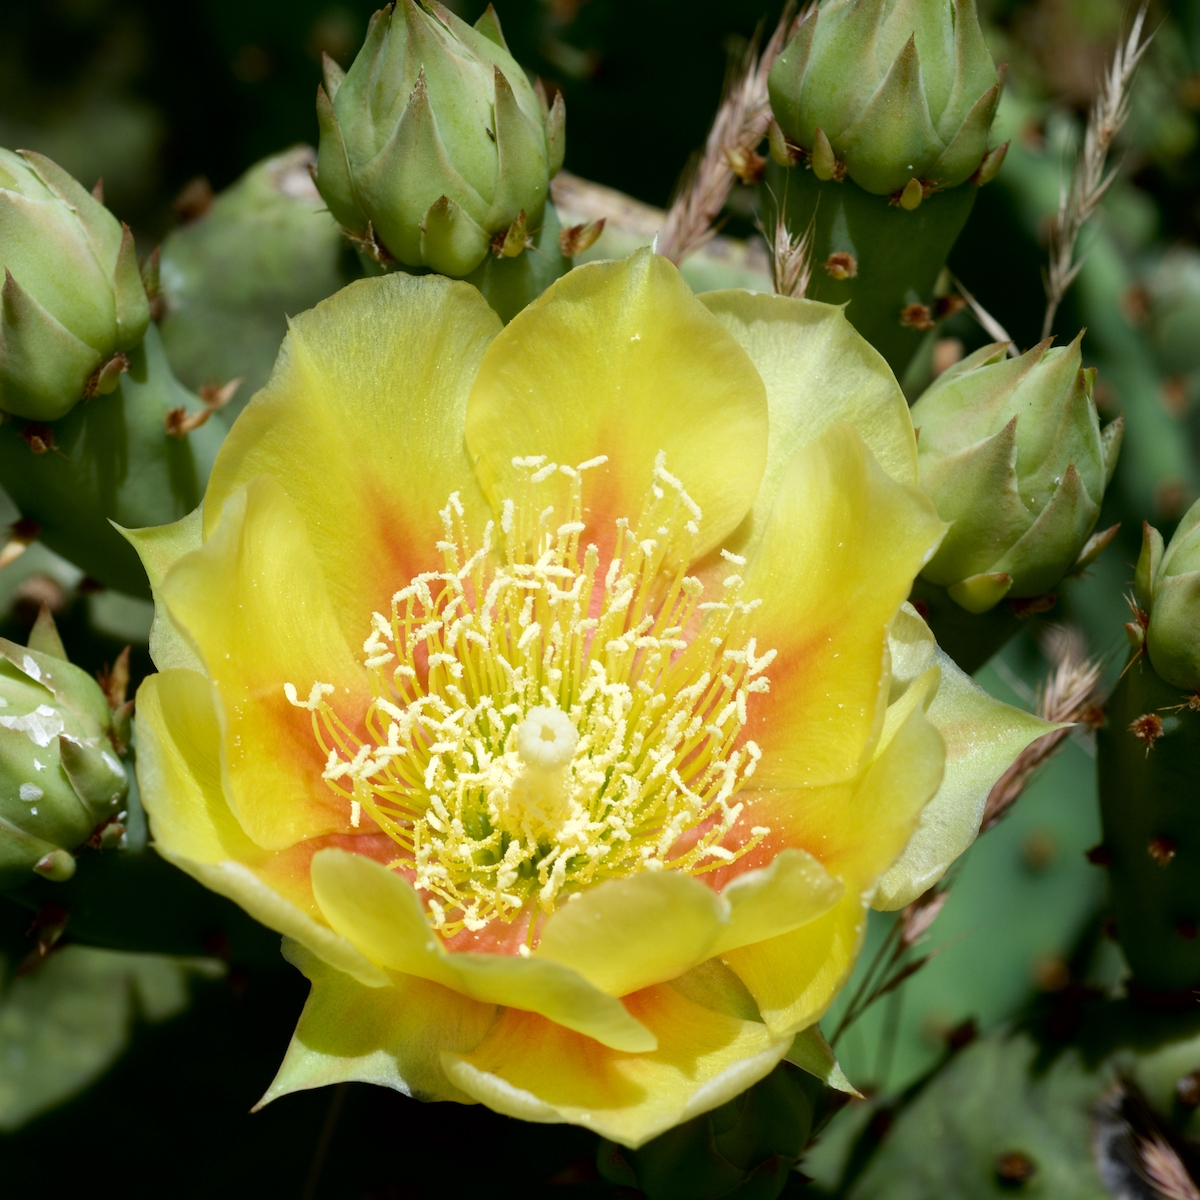 Know Your Natives – Eastern Prickly Pear